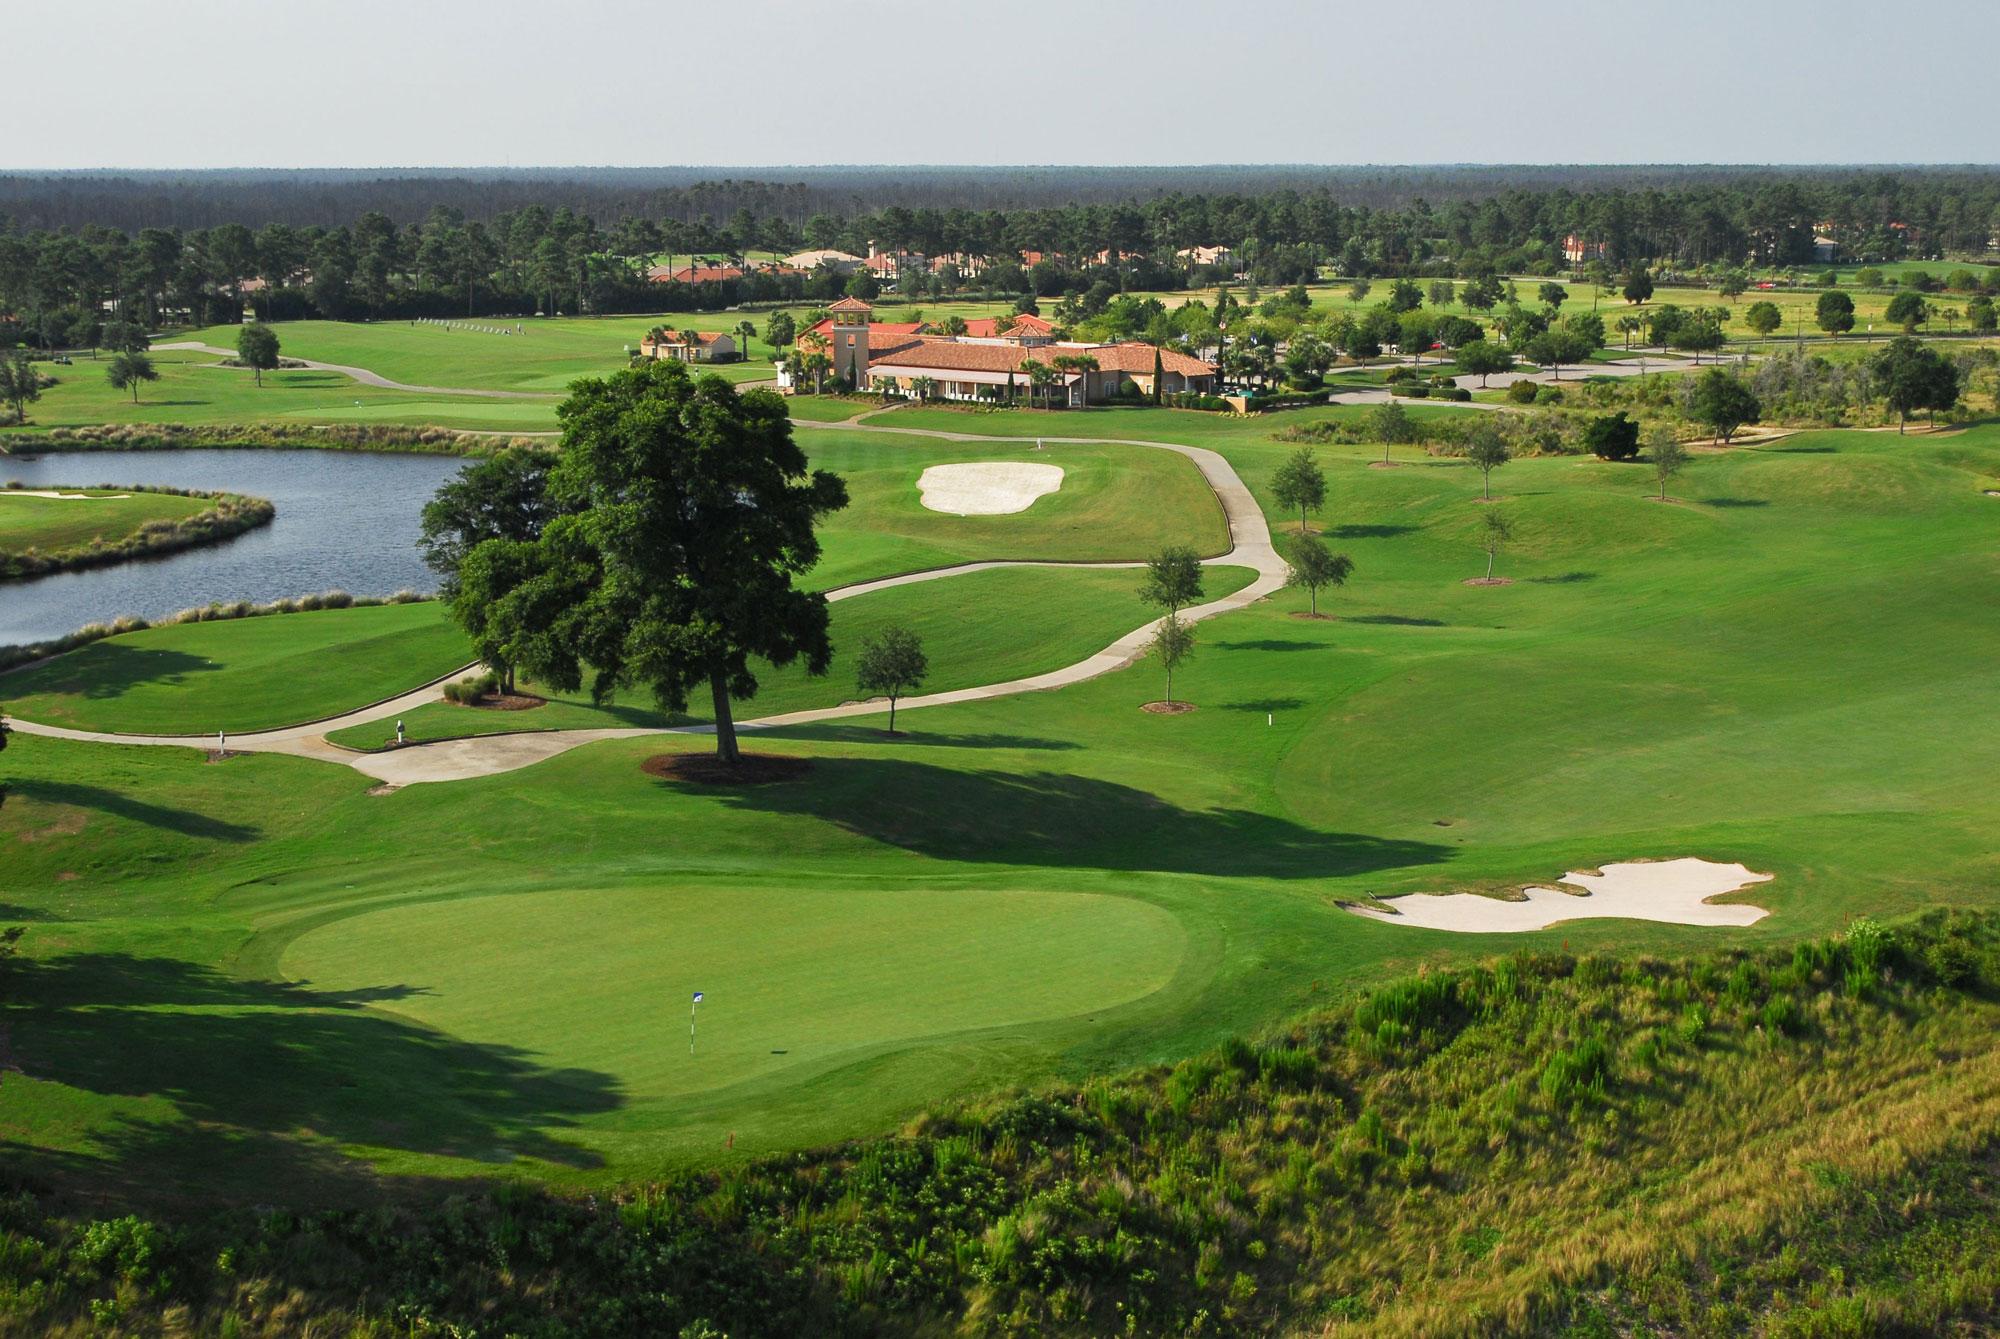 View Grande Dunes Golf's lovely golf course within impressive South Carolina.